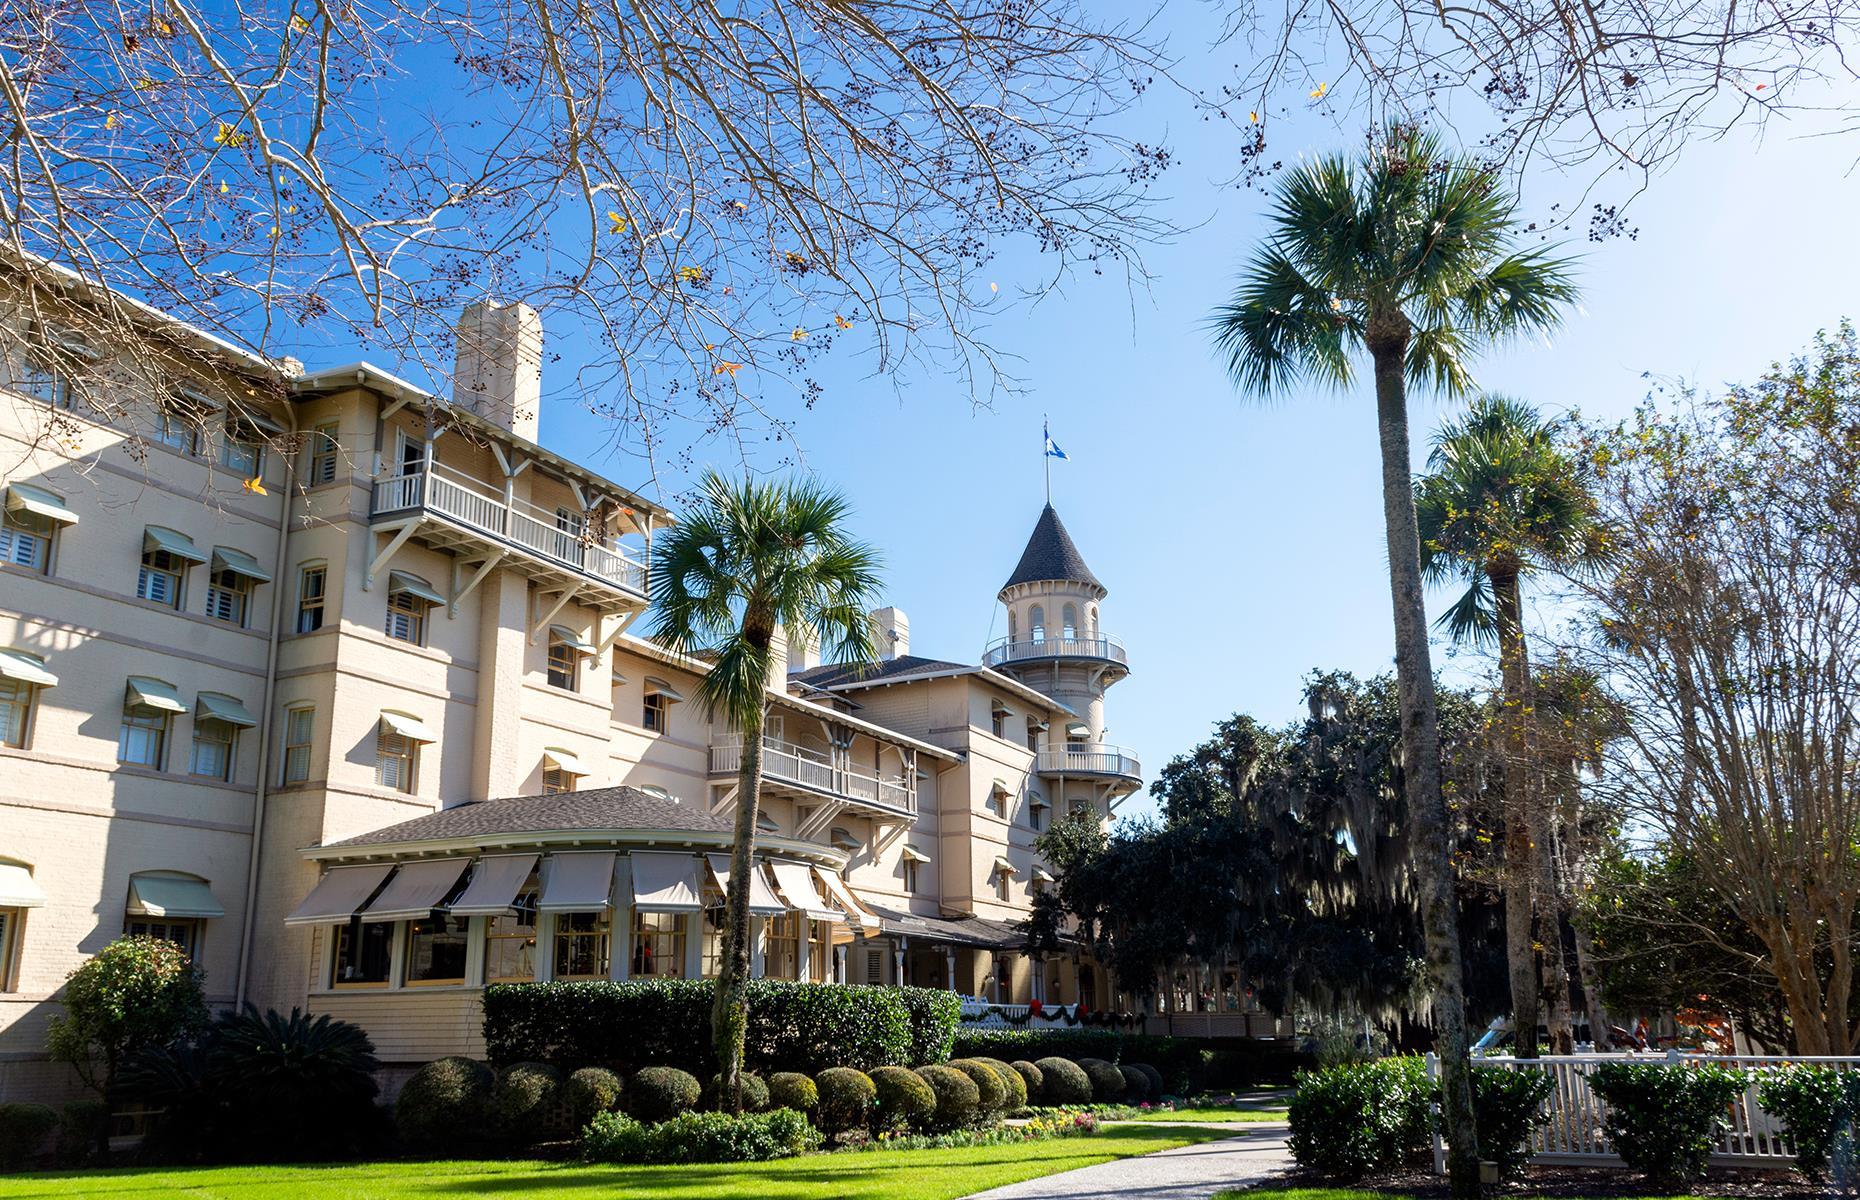 <p>Opening in 1888, the sprawling <a href="https://www.jekyllclub.com/">Jekyll Island Club Resort</a> was a retreat for some of the most wealthy people in America, from the Vanderbilts to the Rockefellers. And it seems some of the resort's elite guests couldn't tear themselves away, even in the afterlife. Some say the property is haunted by late financier J.P. Morgan while others say they've seen the ghost of Samuel Spencer, a railroad executive who also frequented the club.</p>